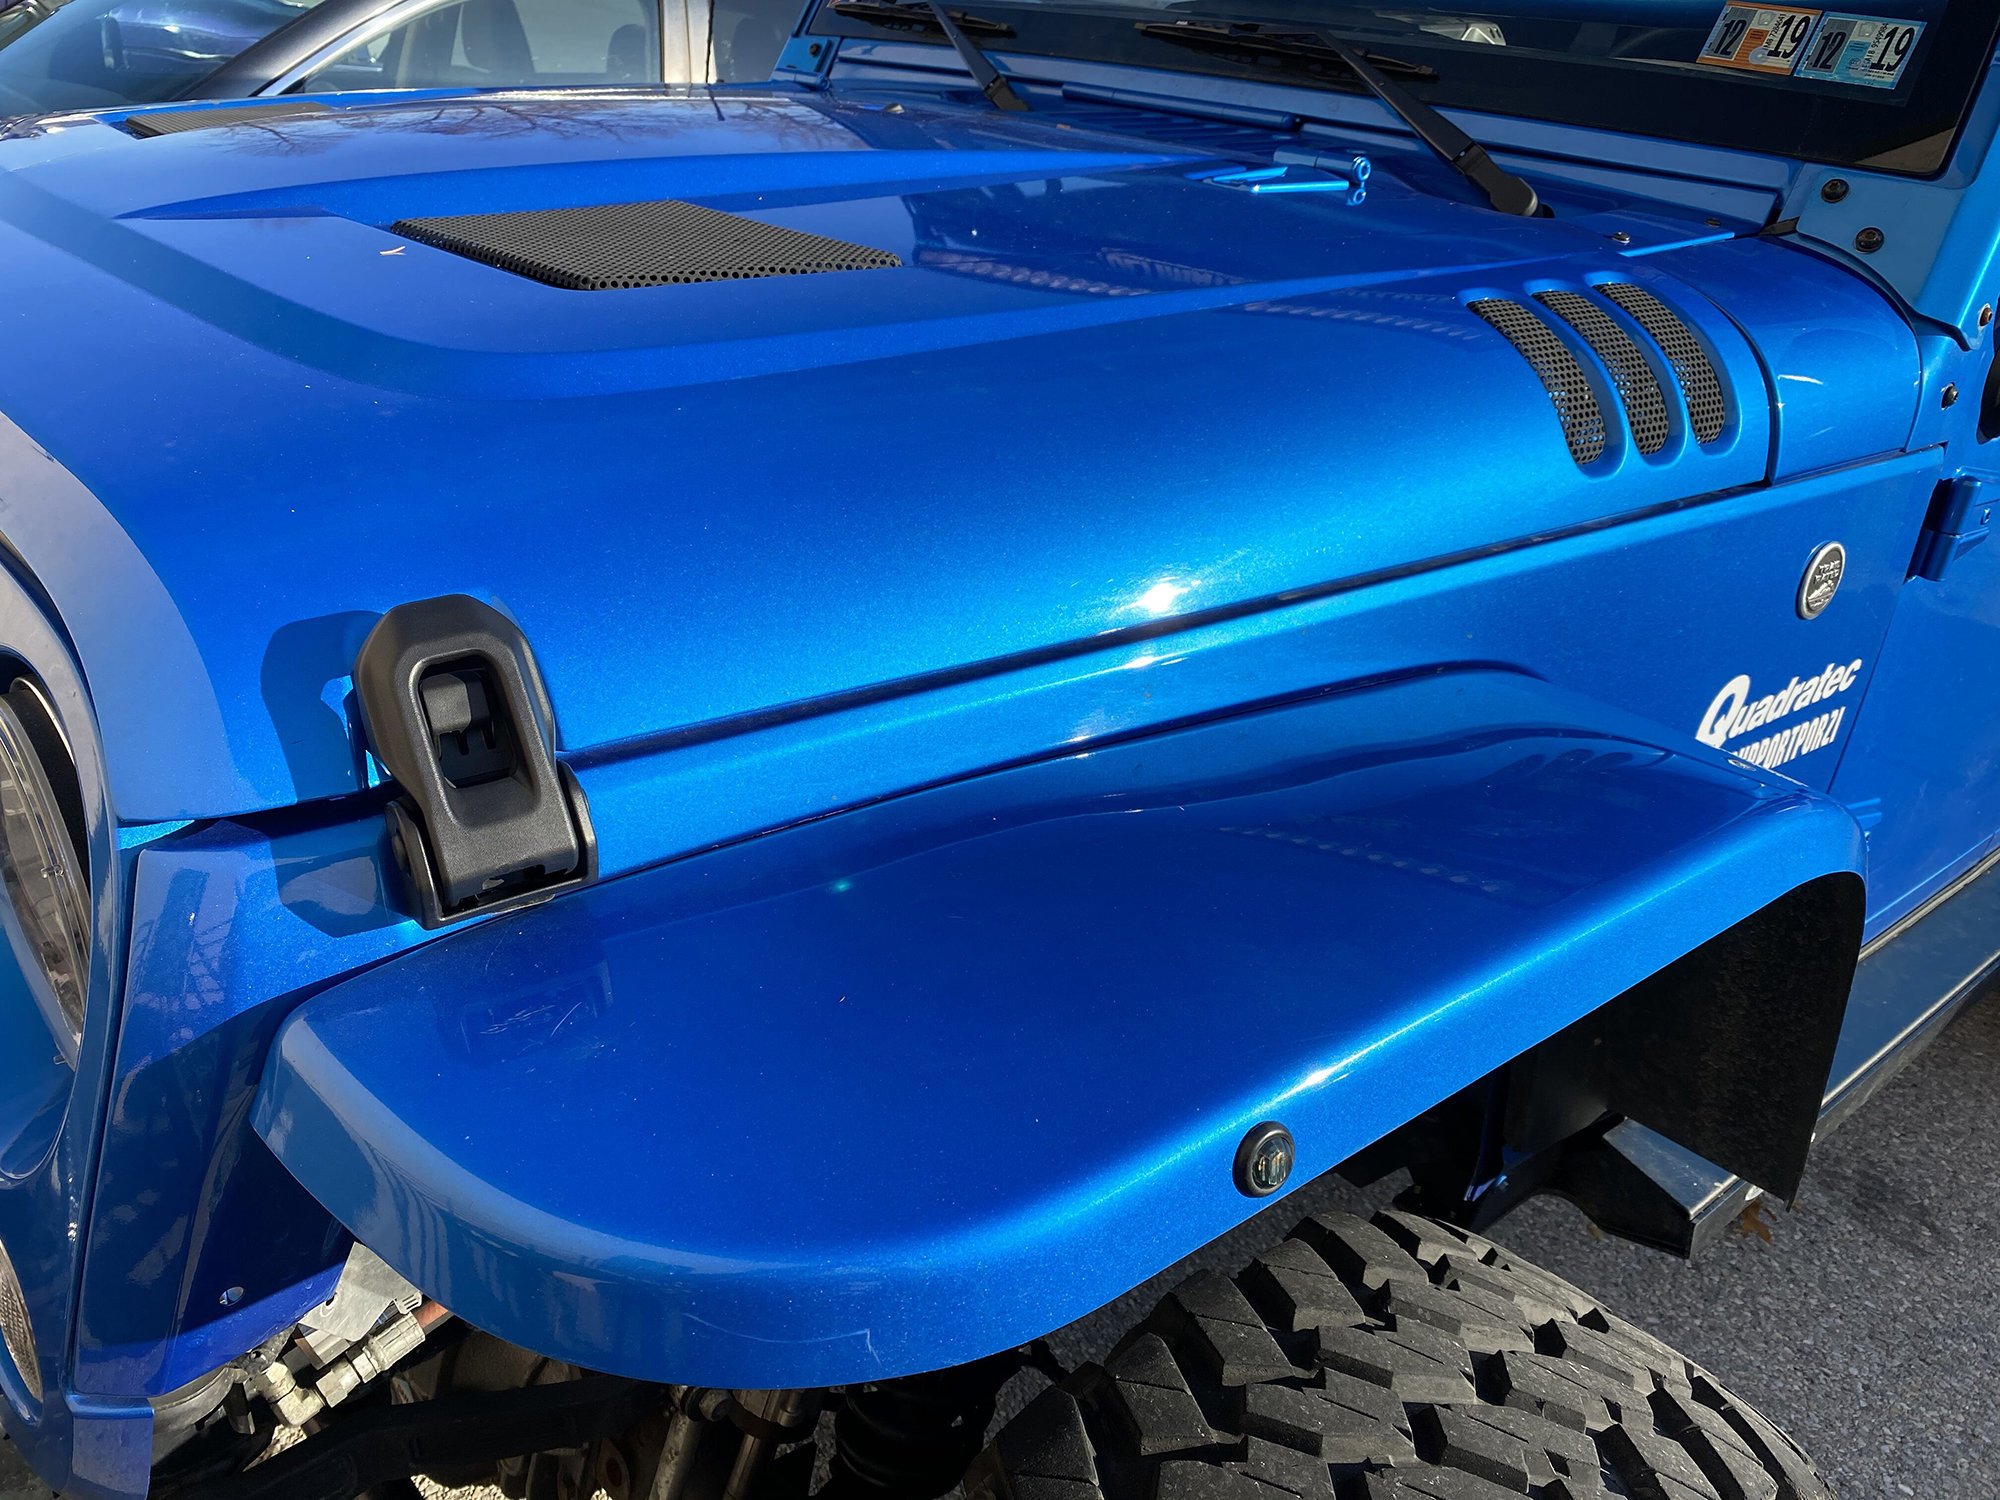 How To Upgrade Your Factory Wrangler JK Hood Catches To Mopar JL Style |  Quadratec